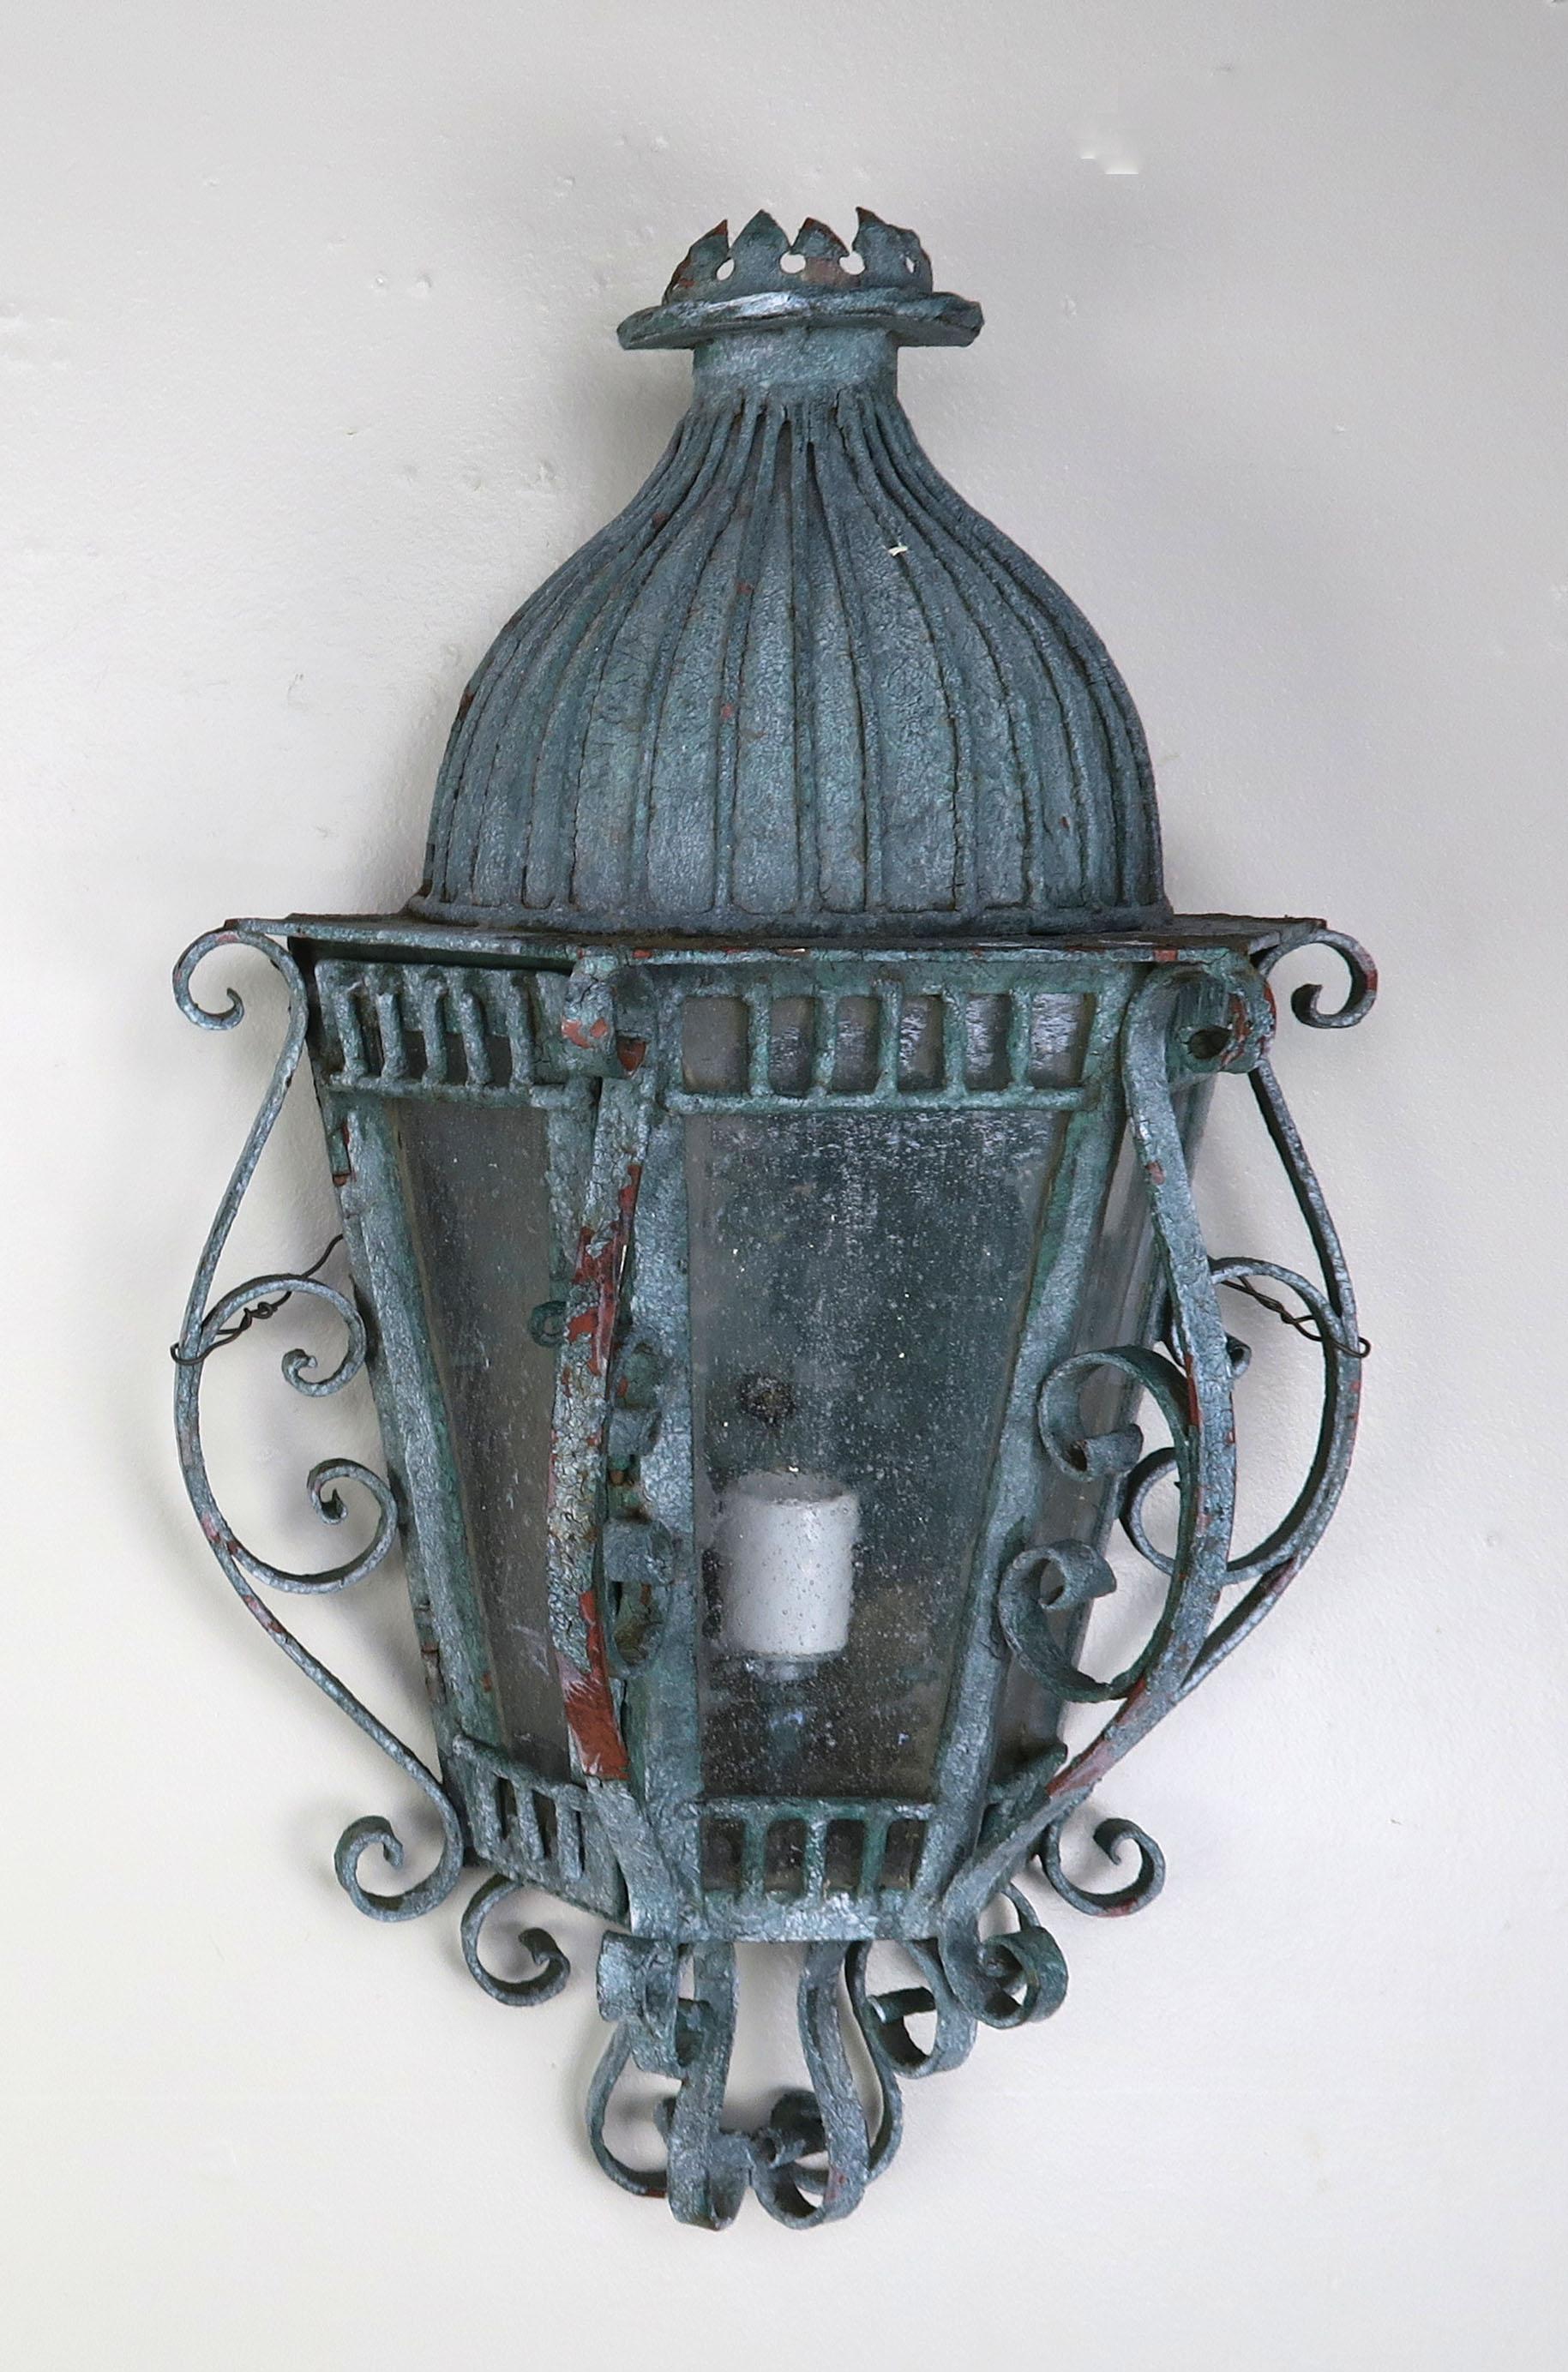 Pair of French Louis XV style painted handwrought iron sconces with original pitted glass. Beautiful scrolls adorn the fixtures and a small crown can be seen on the tops of both fixtures. The fixtures are newly rewired with new sockets and are ready